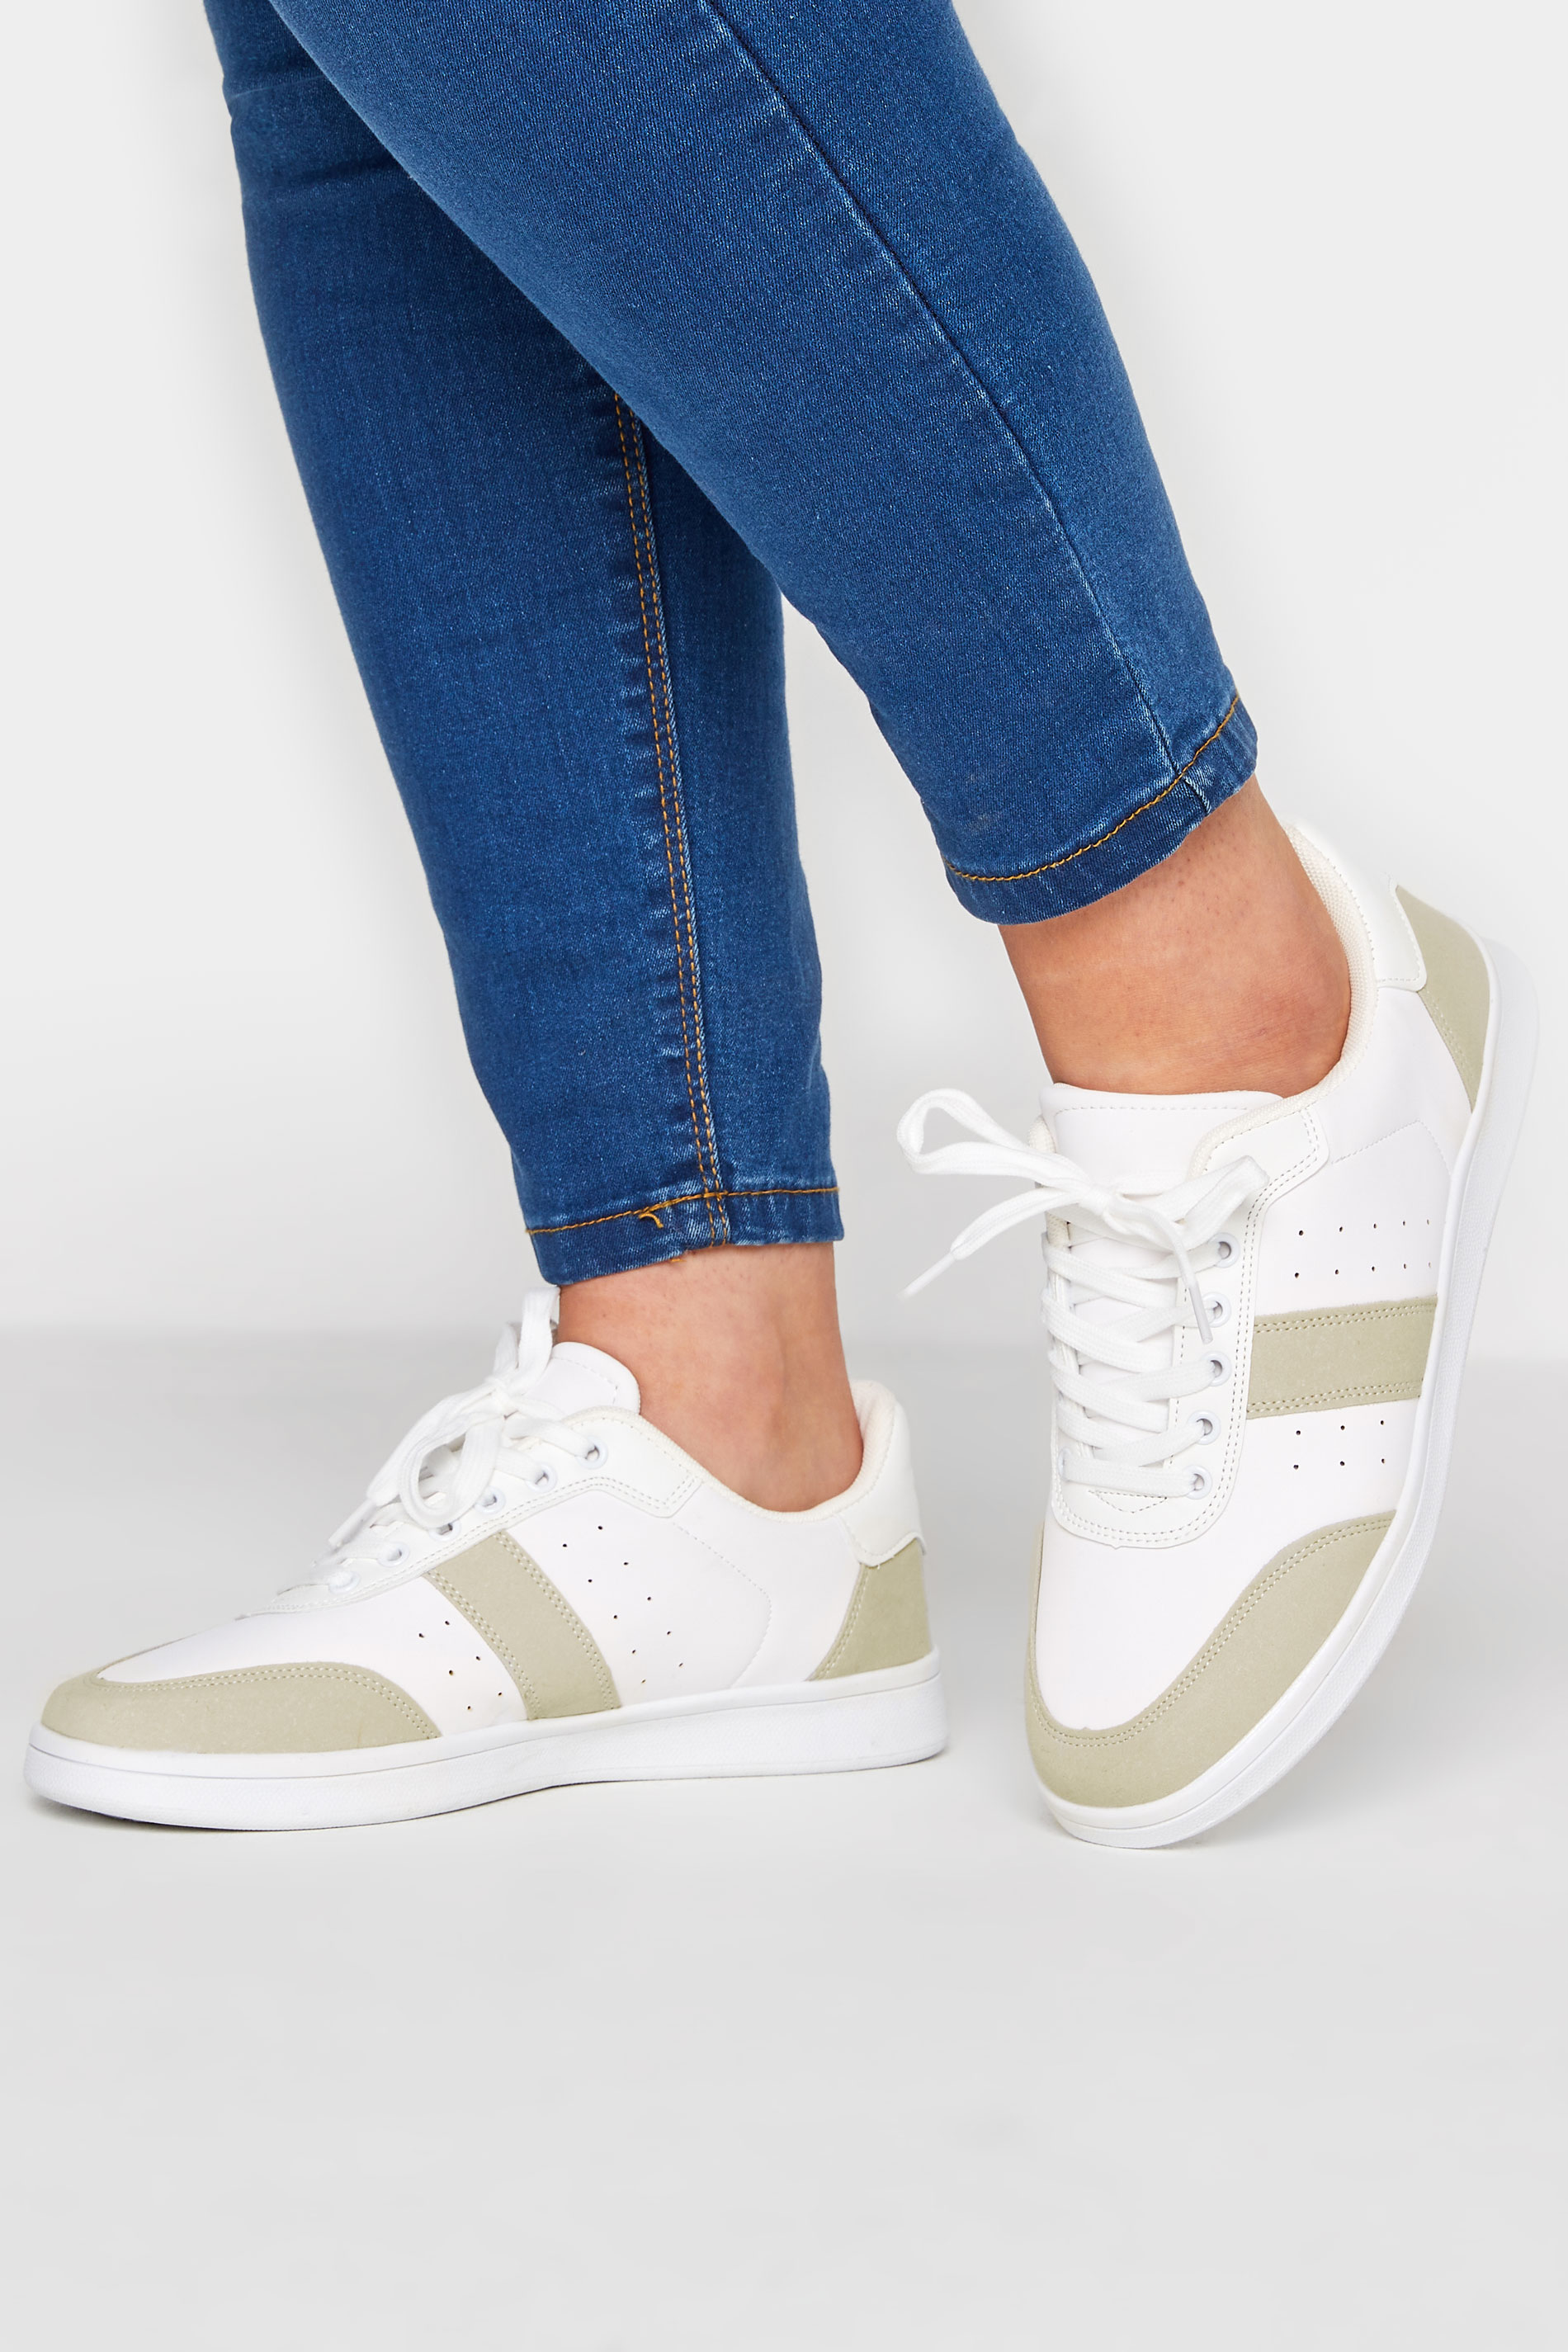 White & Beige Brown Stripe Trainers In Wide E Fit | Yours Clothing 1